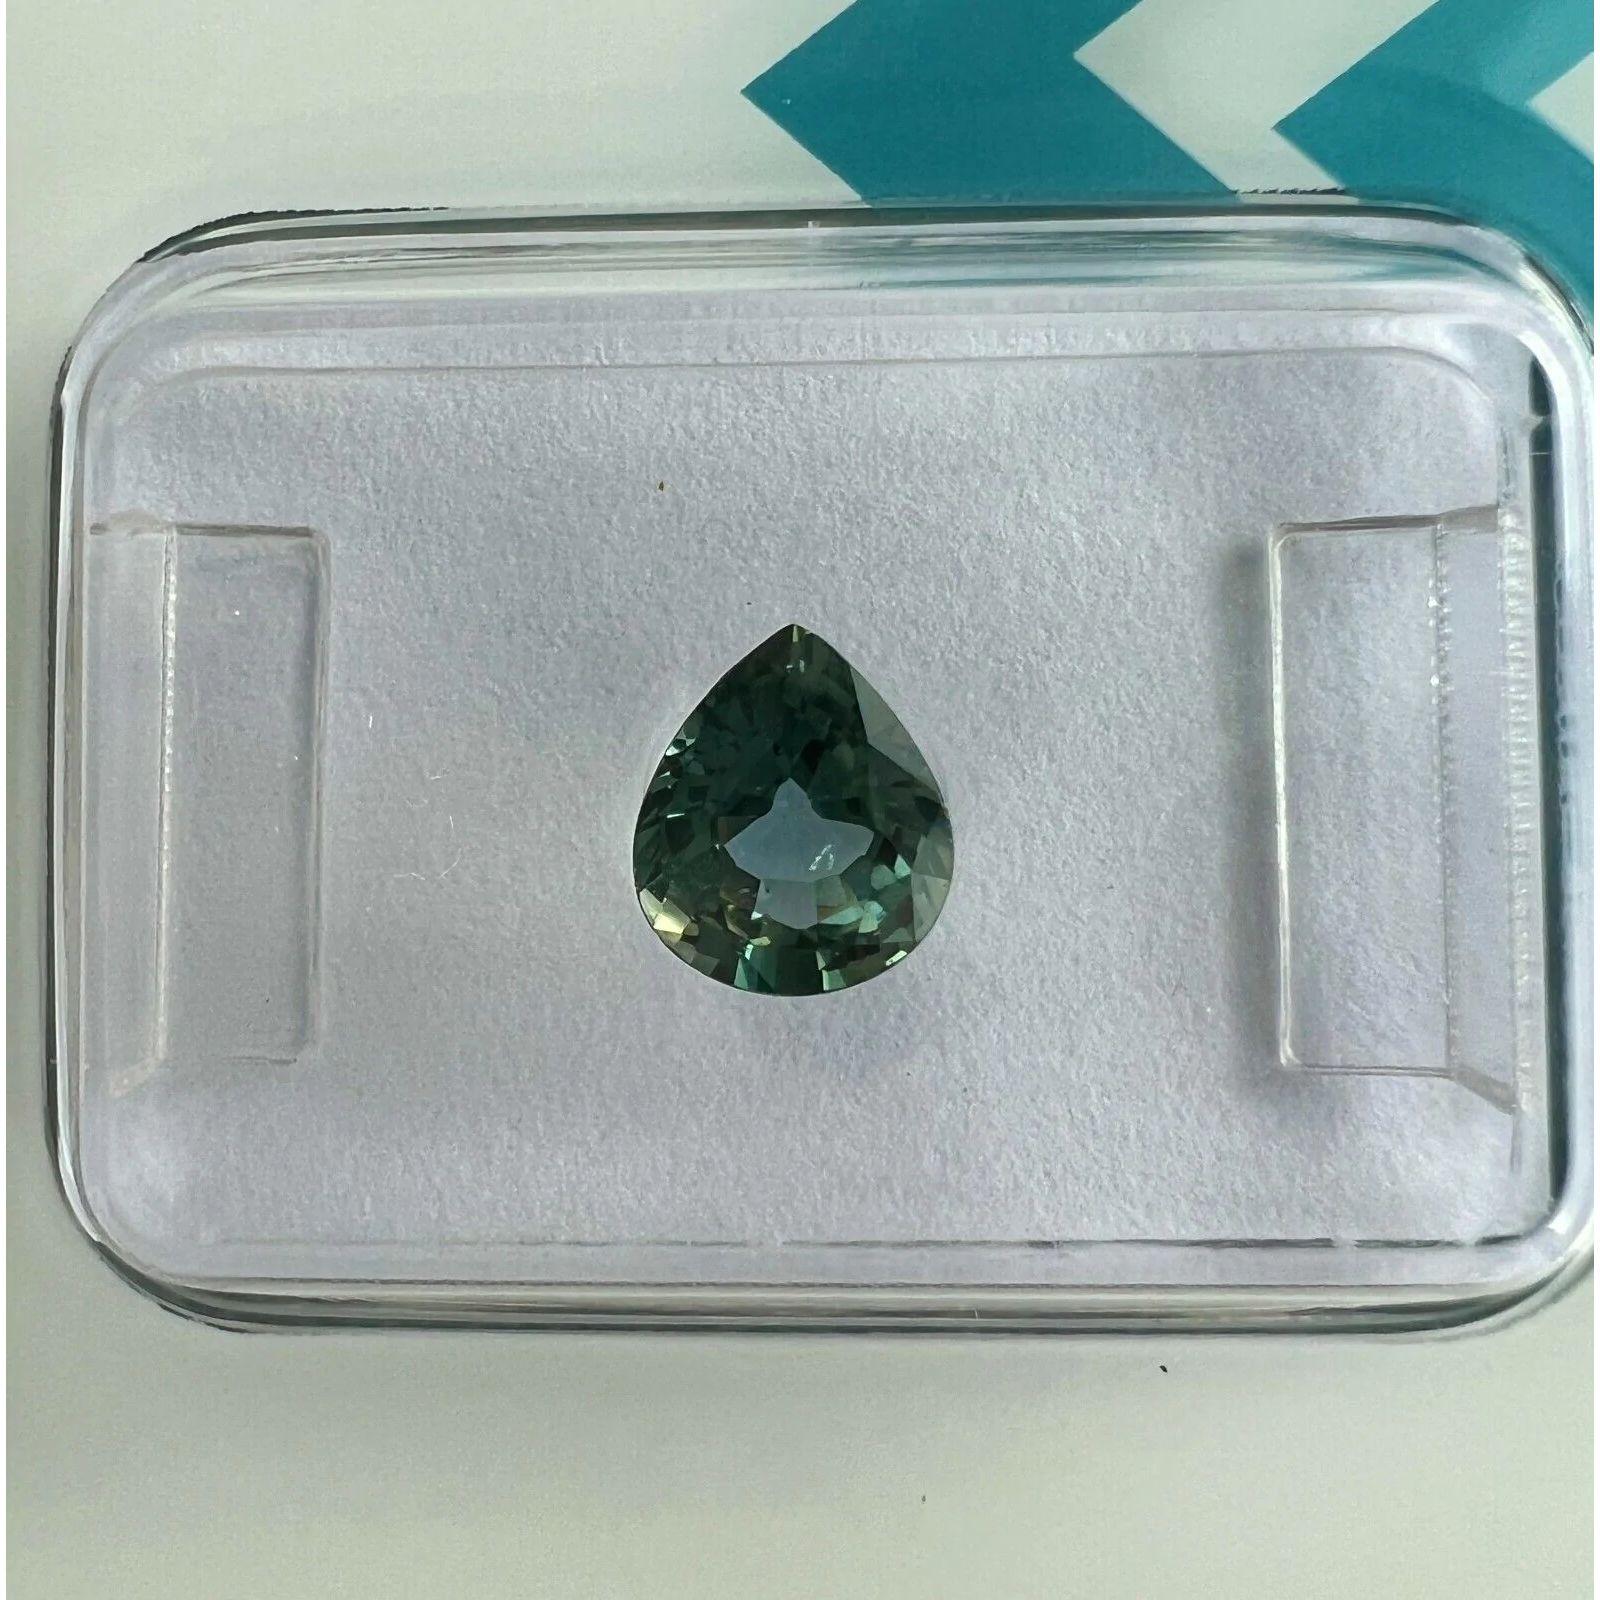 Untreated Green Blue Vivid Sapphire 0.76ct IGI Certified Unheated Pear Cut Gem

Blue Green Untreated Sapphire In IGI Blister.
0.76 Carat with a very good pear cut and totally untreated/unheated which is very rare for natural sapphires. Confirmed as